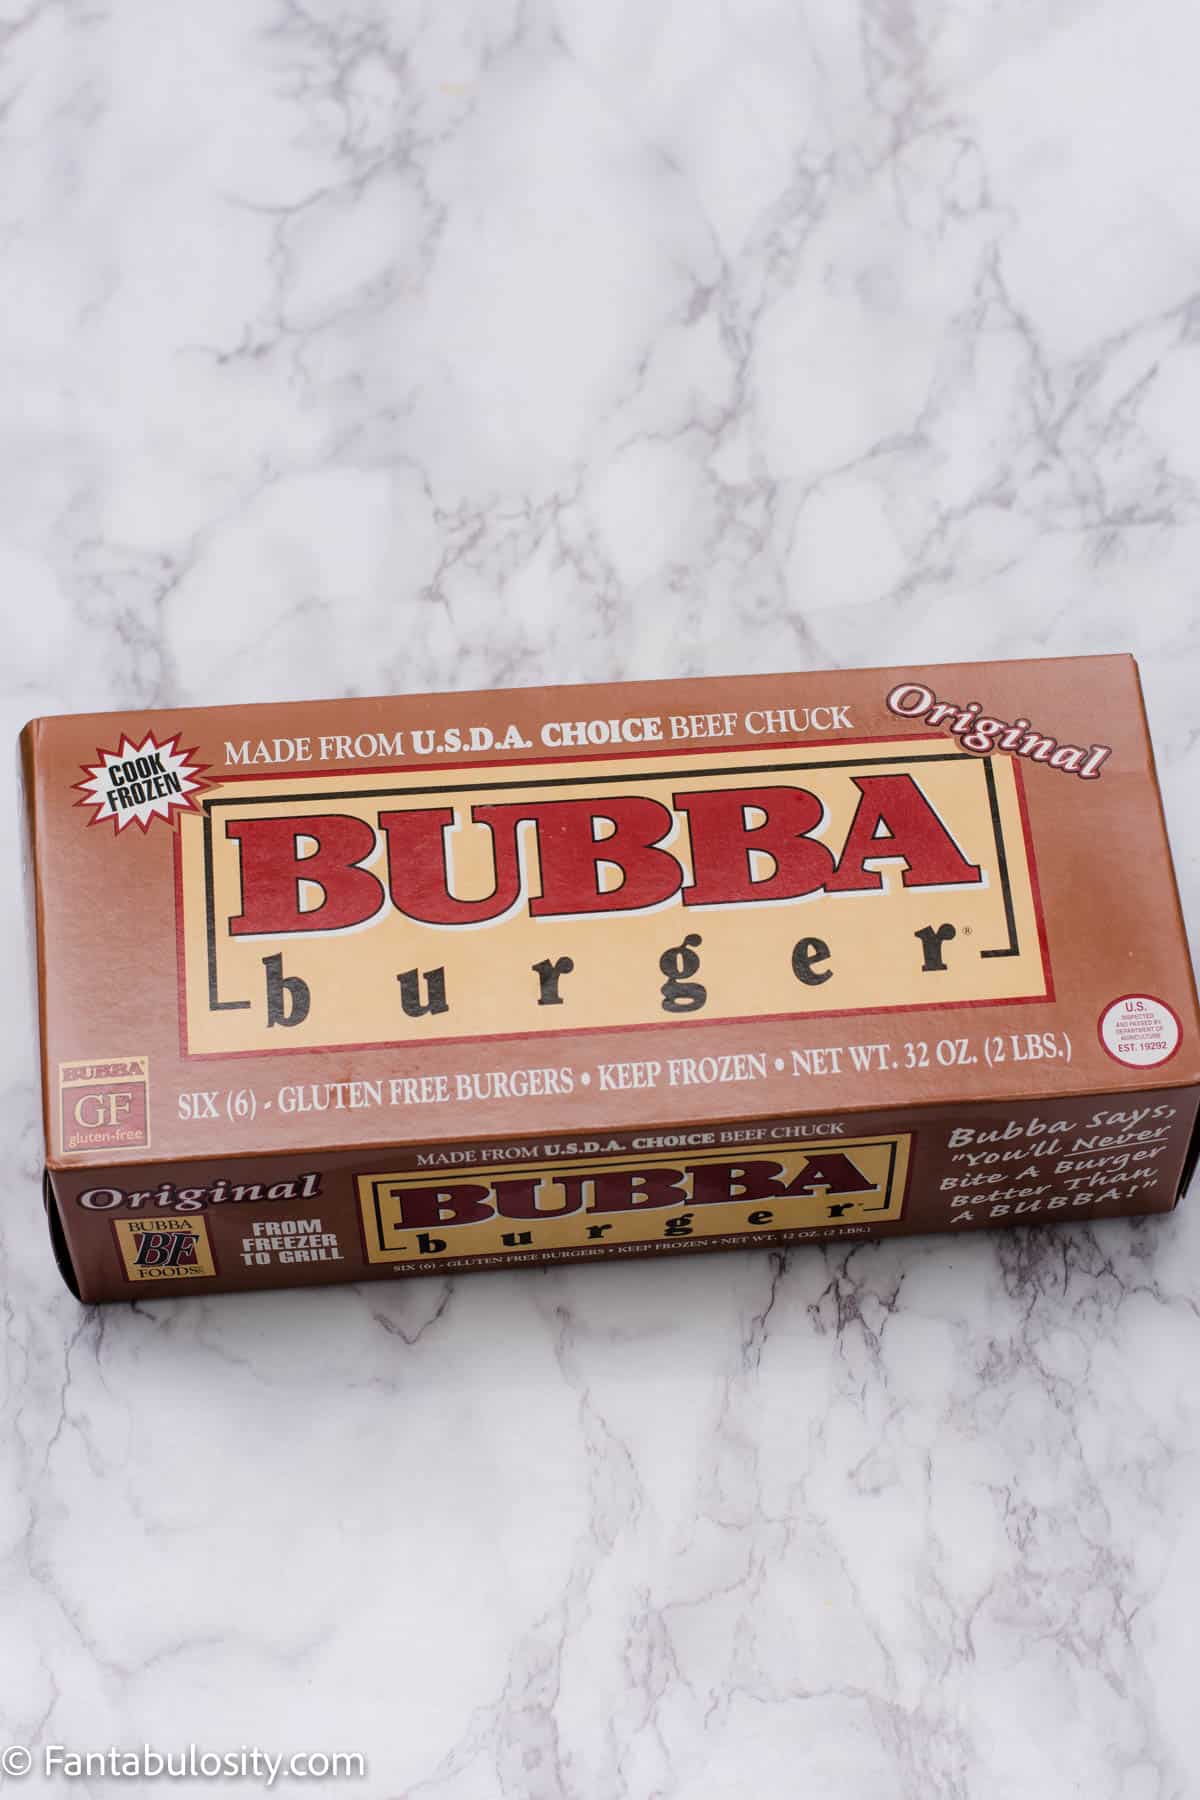 Bubba Burgers in Box on Counter